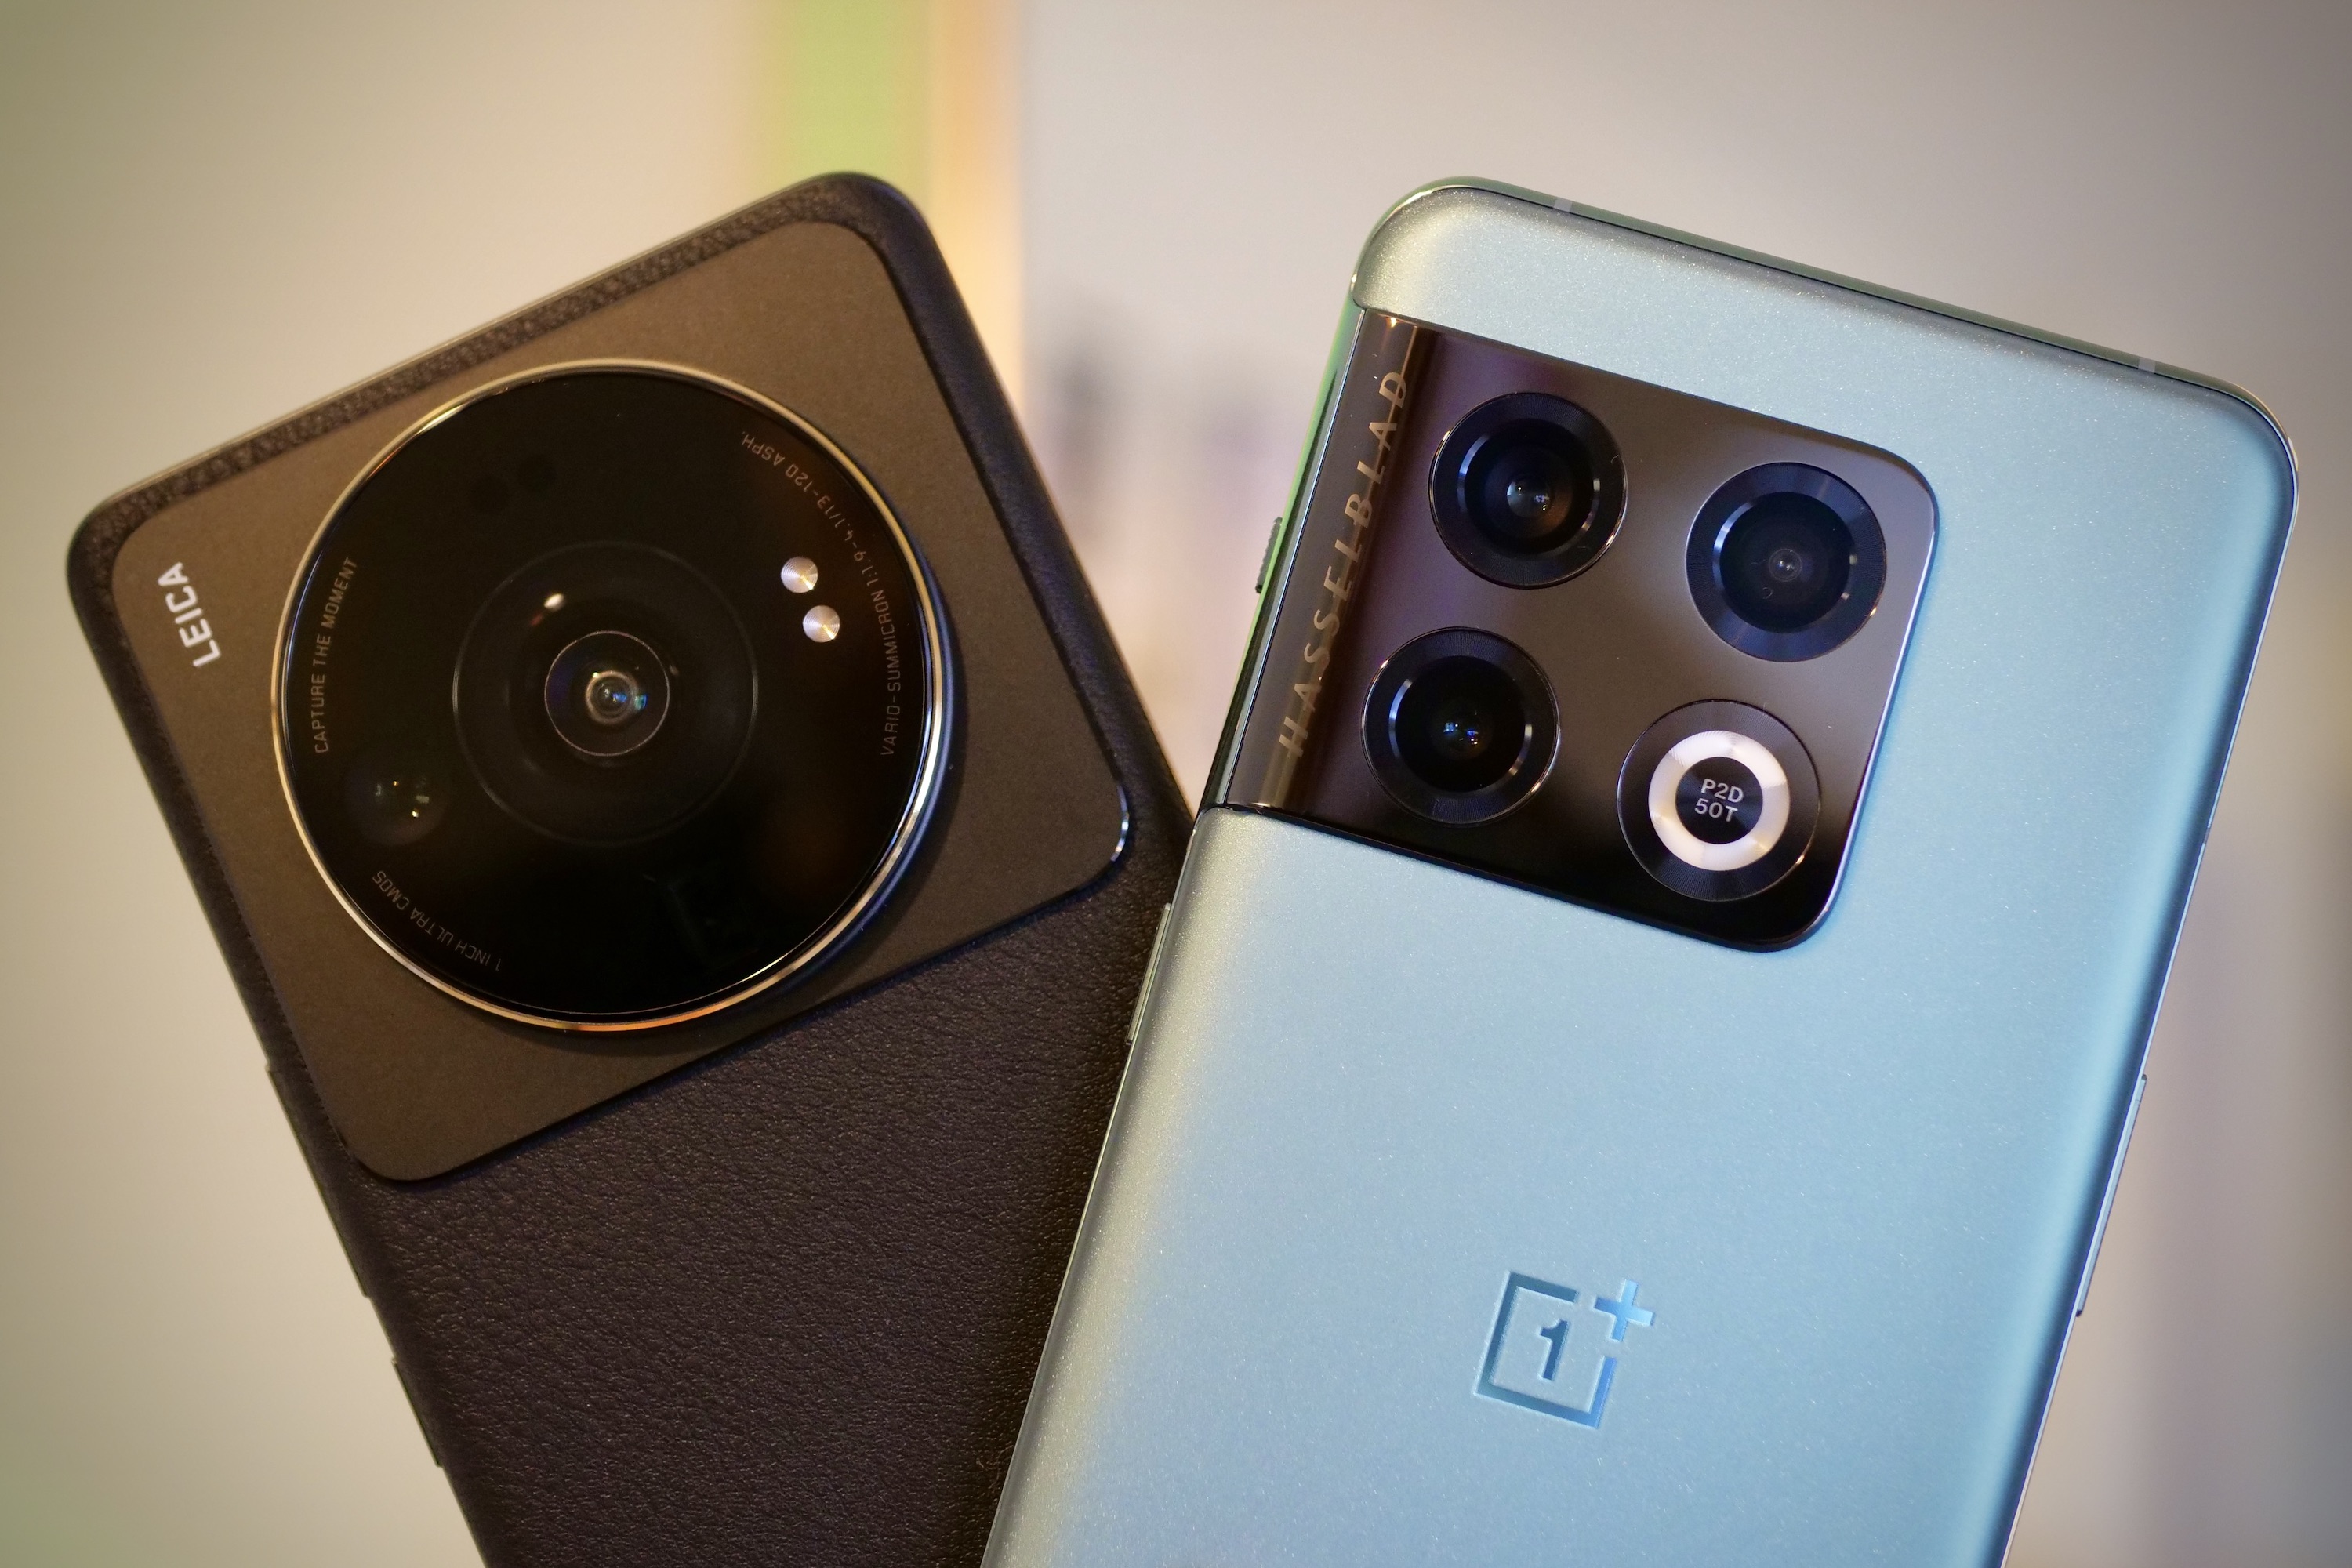 The OnePlus 10 Pro and the Xiaomi 12S Ultra's camera modules.